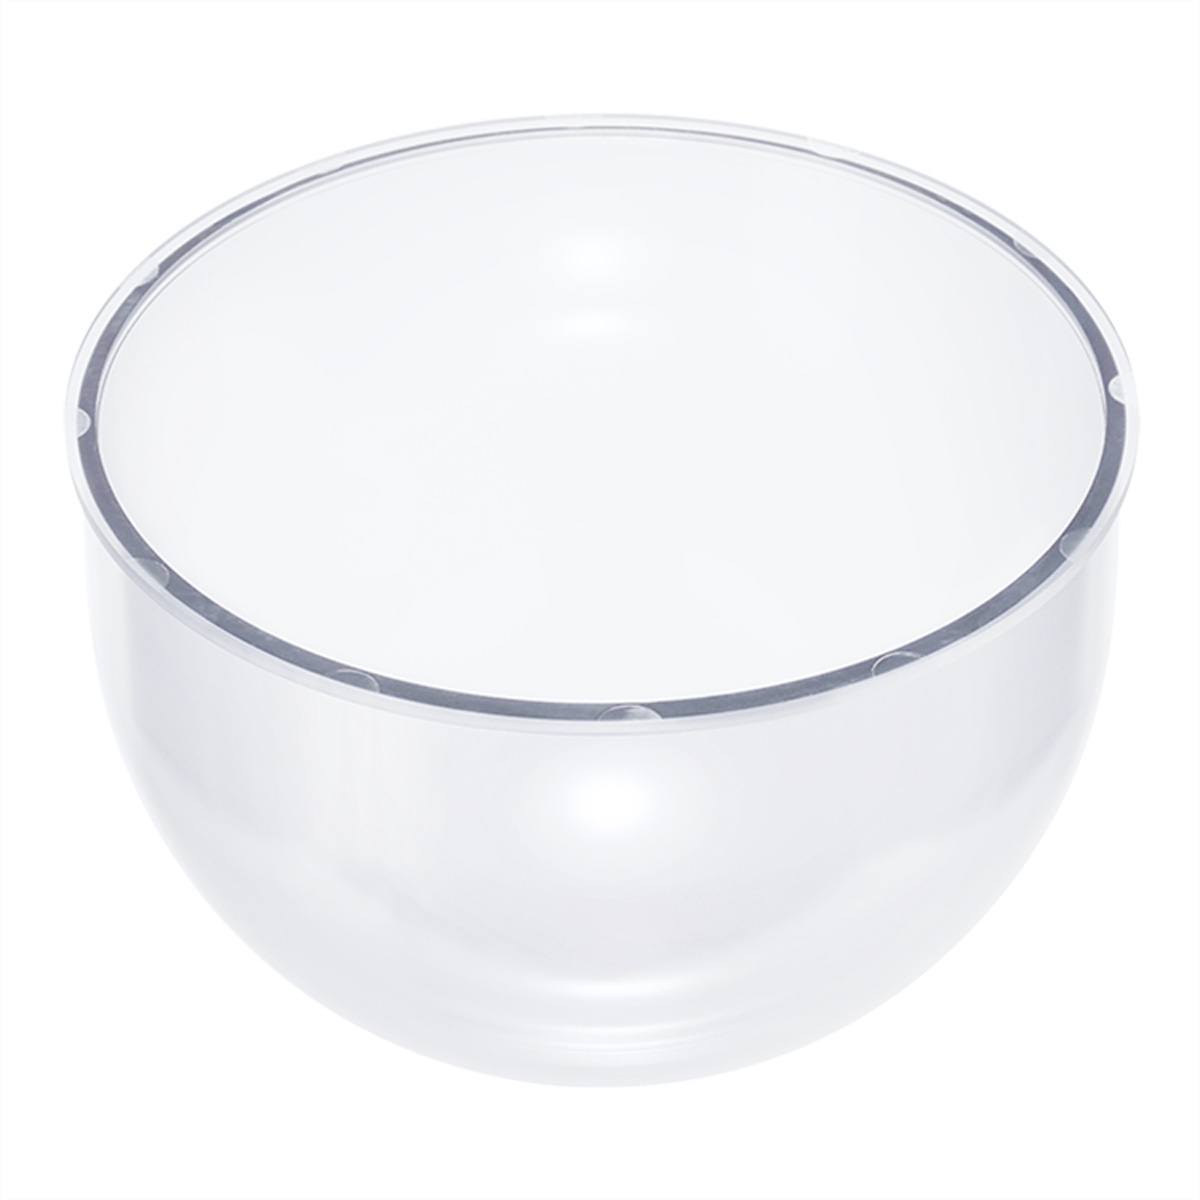 i-PRO WV-QDC502C Bracket, Clear Dome Cover